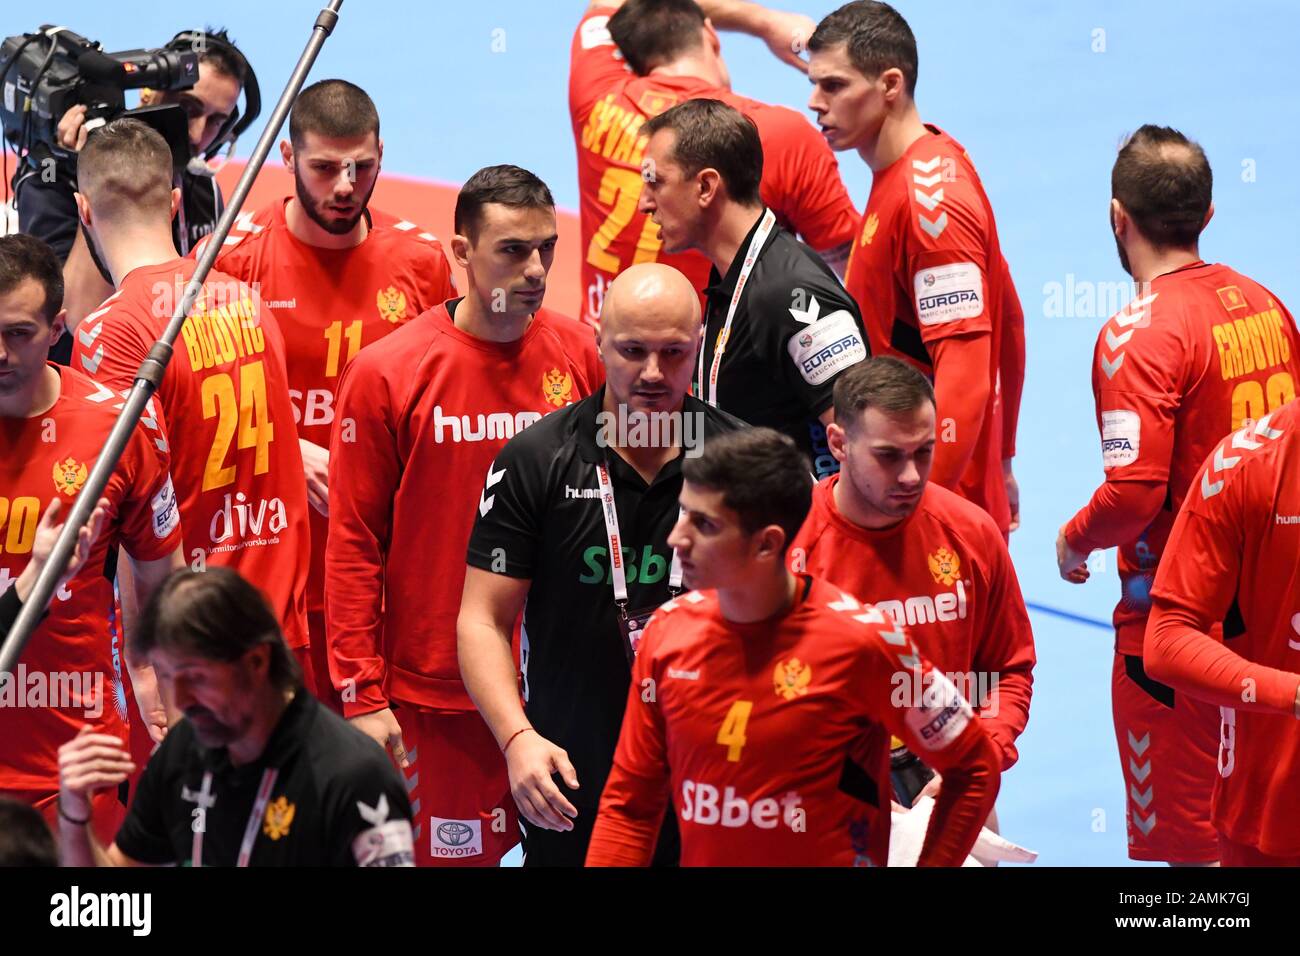 Zoran Roganovic, head coach of Montenegro and his players are seen before  the handball match between National teams of Montenegro and Belarus in  Group A of Men's EHF EURO 2020 in Graz